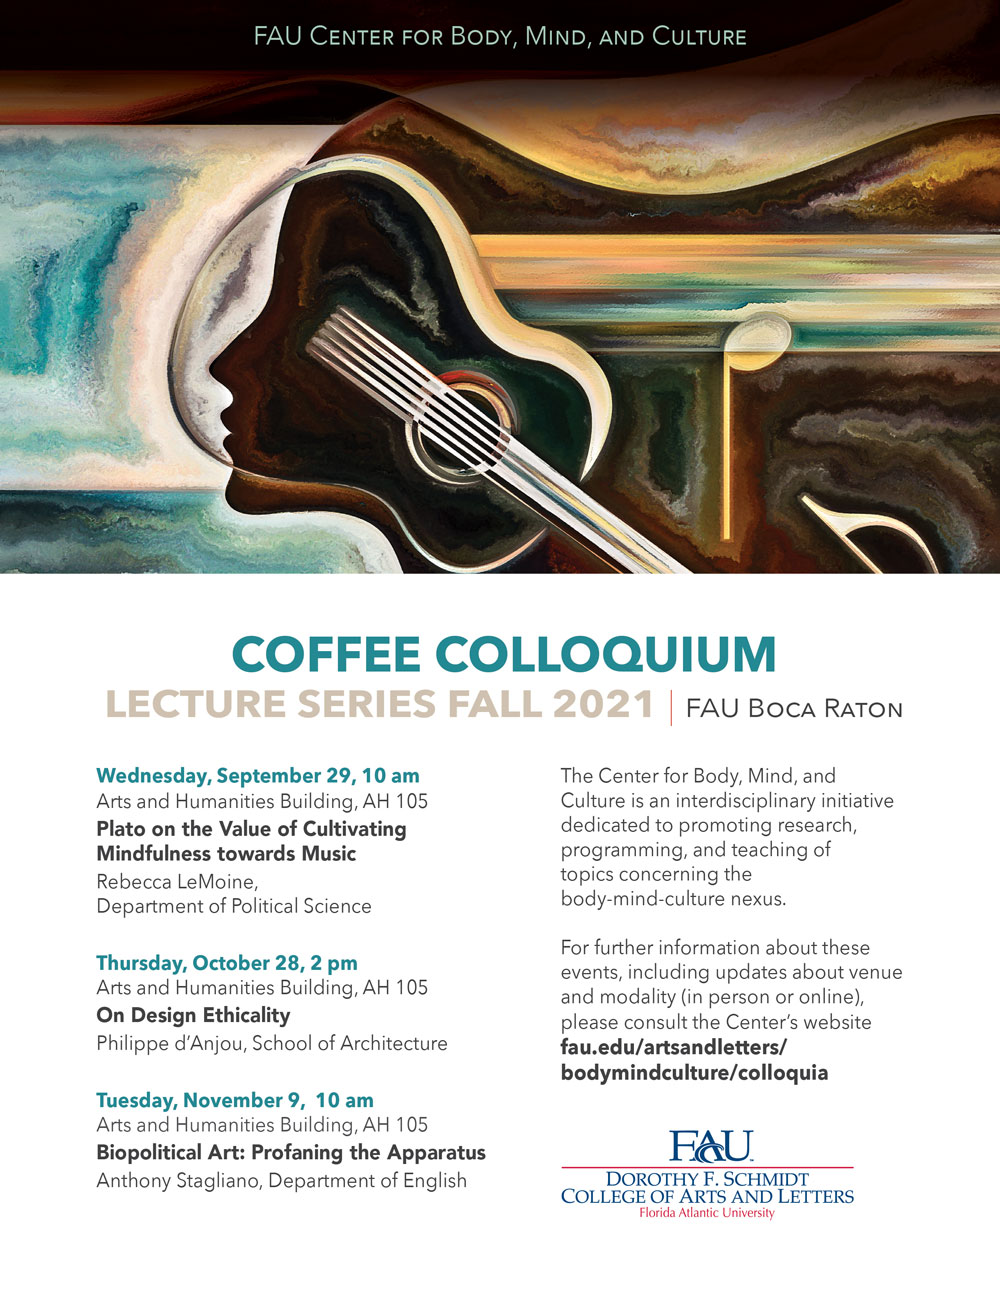 FAU Center for Mind, Body, and Culture Announces Fall 2021 Coffee Colloquium Lecture Series